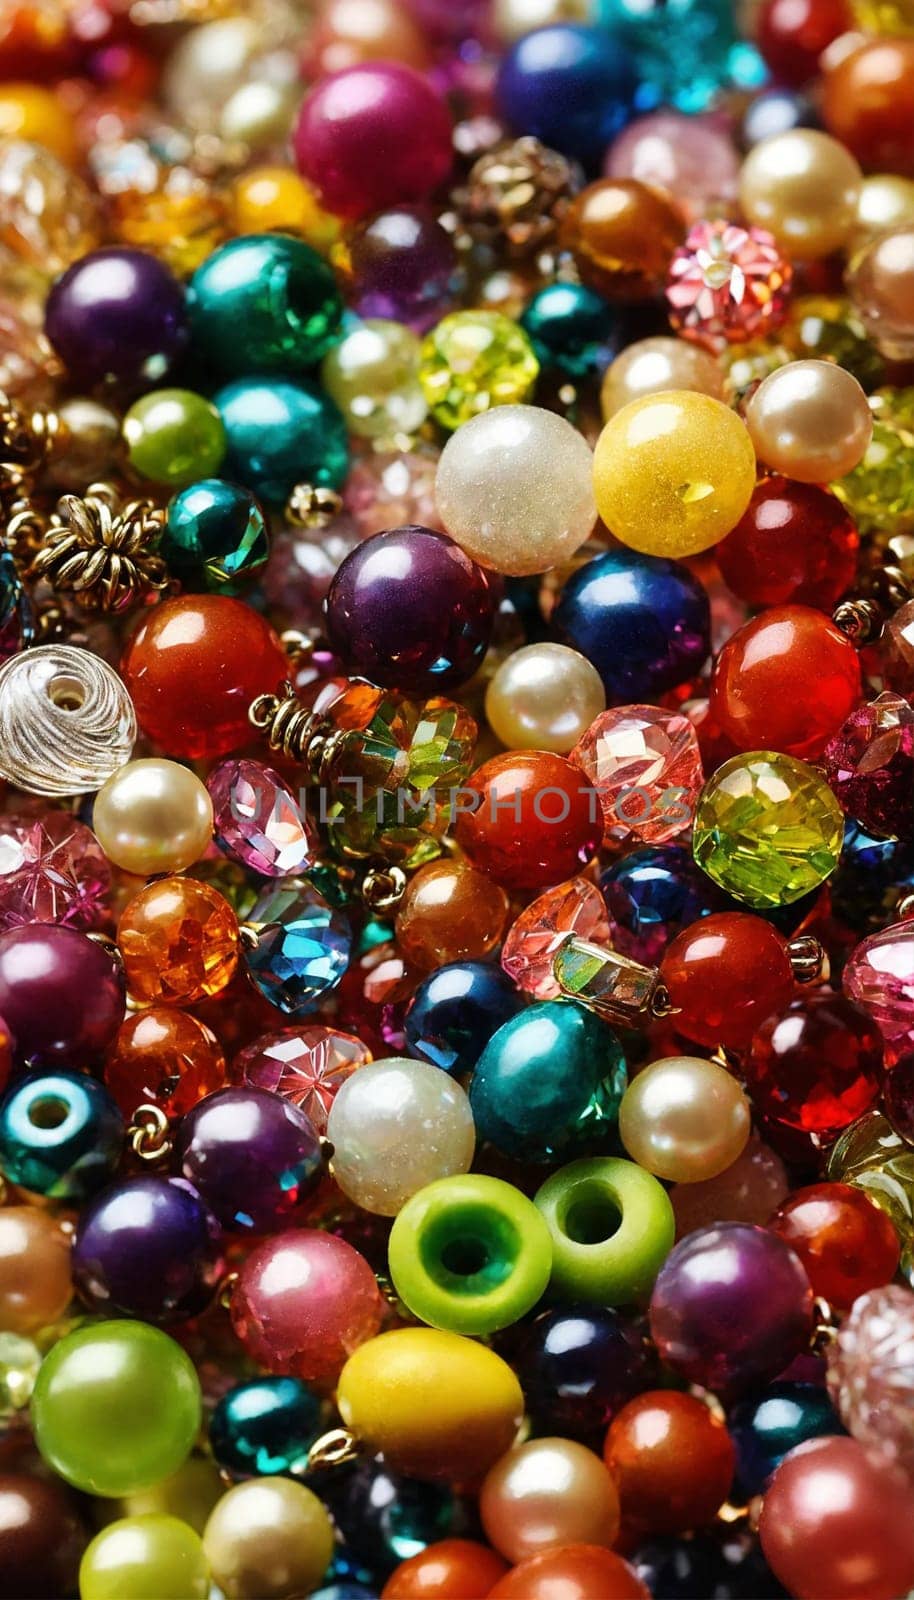 beads for needlework. Selective focus. by mila1784